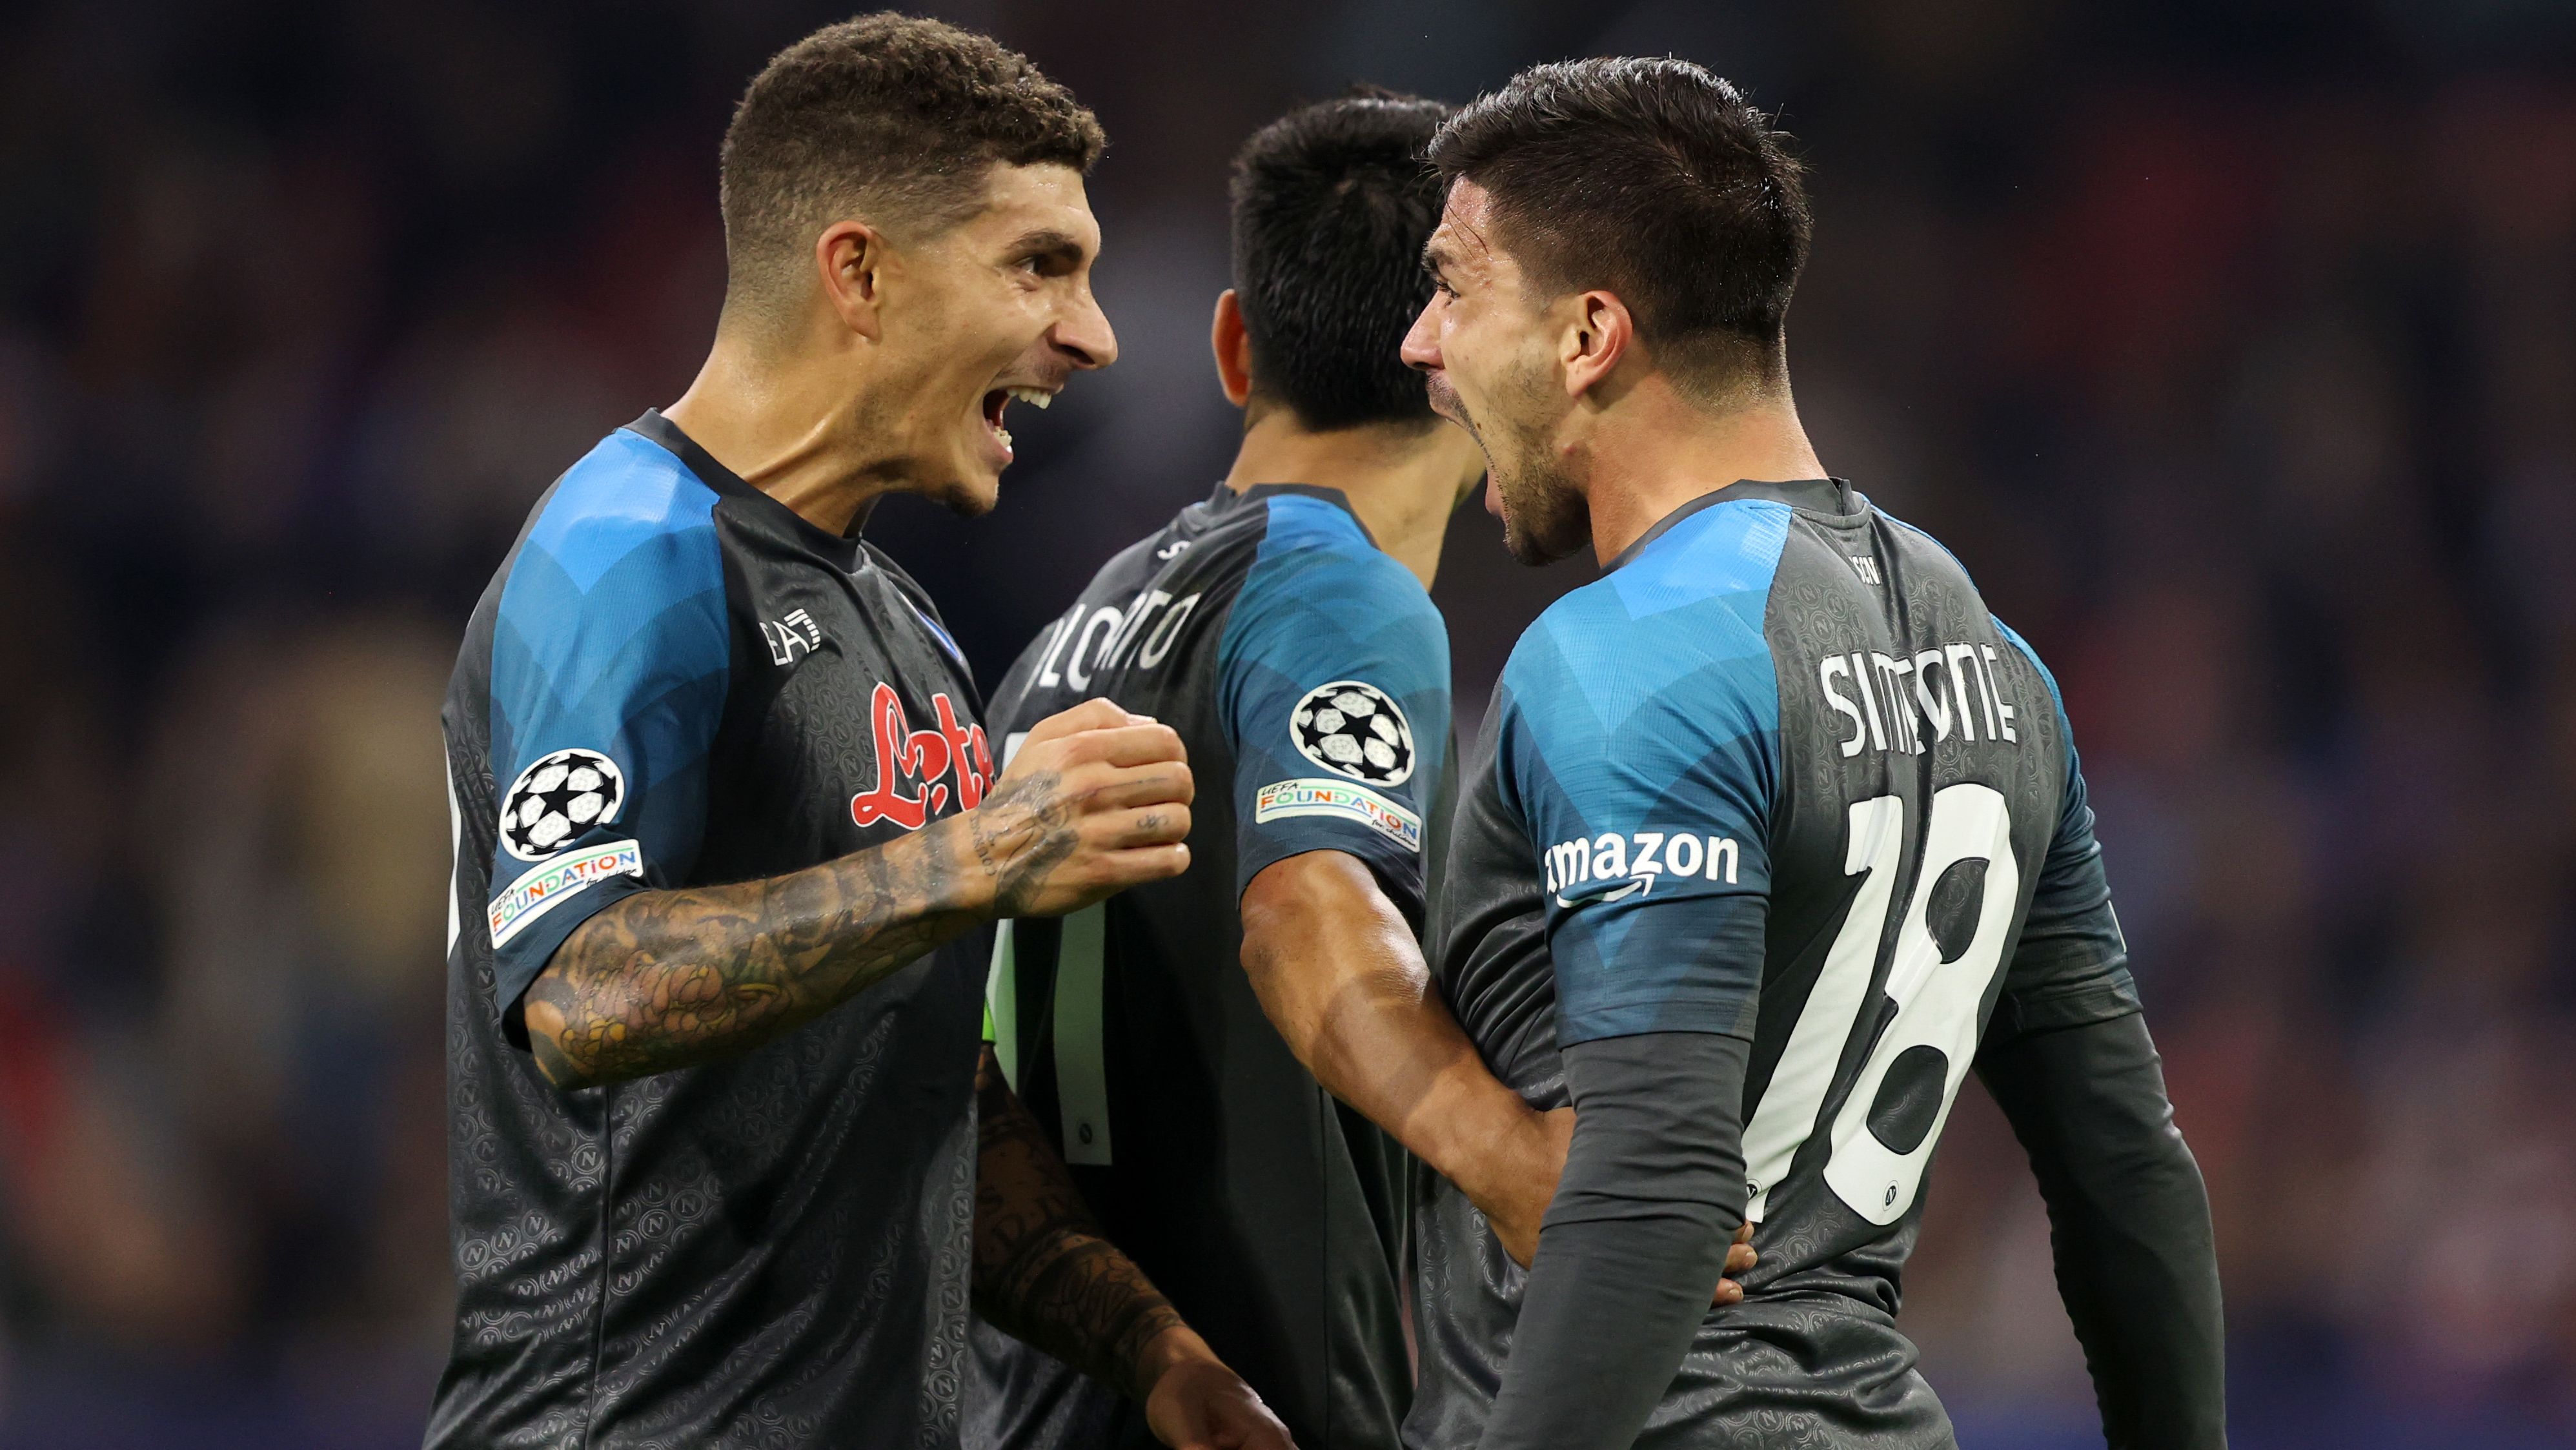 Napoli turned on the style to beat home side Ajax 6-1 on Tuesday. 